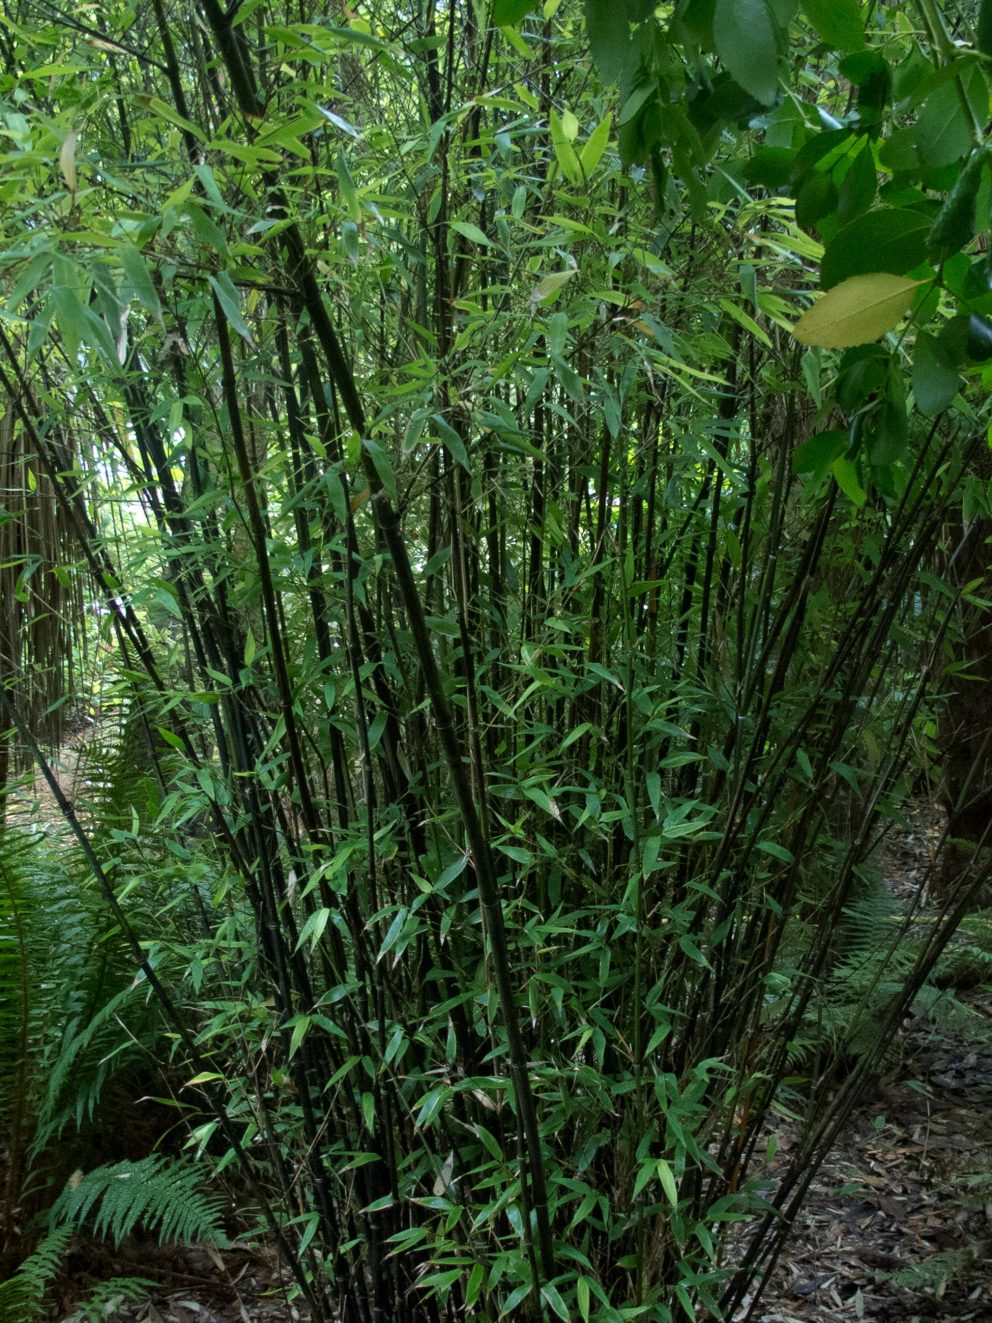 I am so pleased with my black bamboo. It arrived quickly, was wrapped very well and was in excellent condition. More importantly it was exactly as the picture showed so I wasnt let down as is often the case when buying on-line.